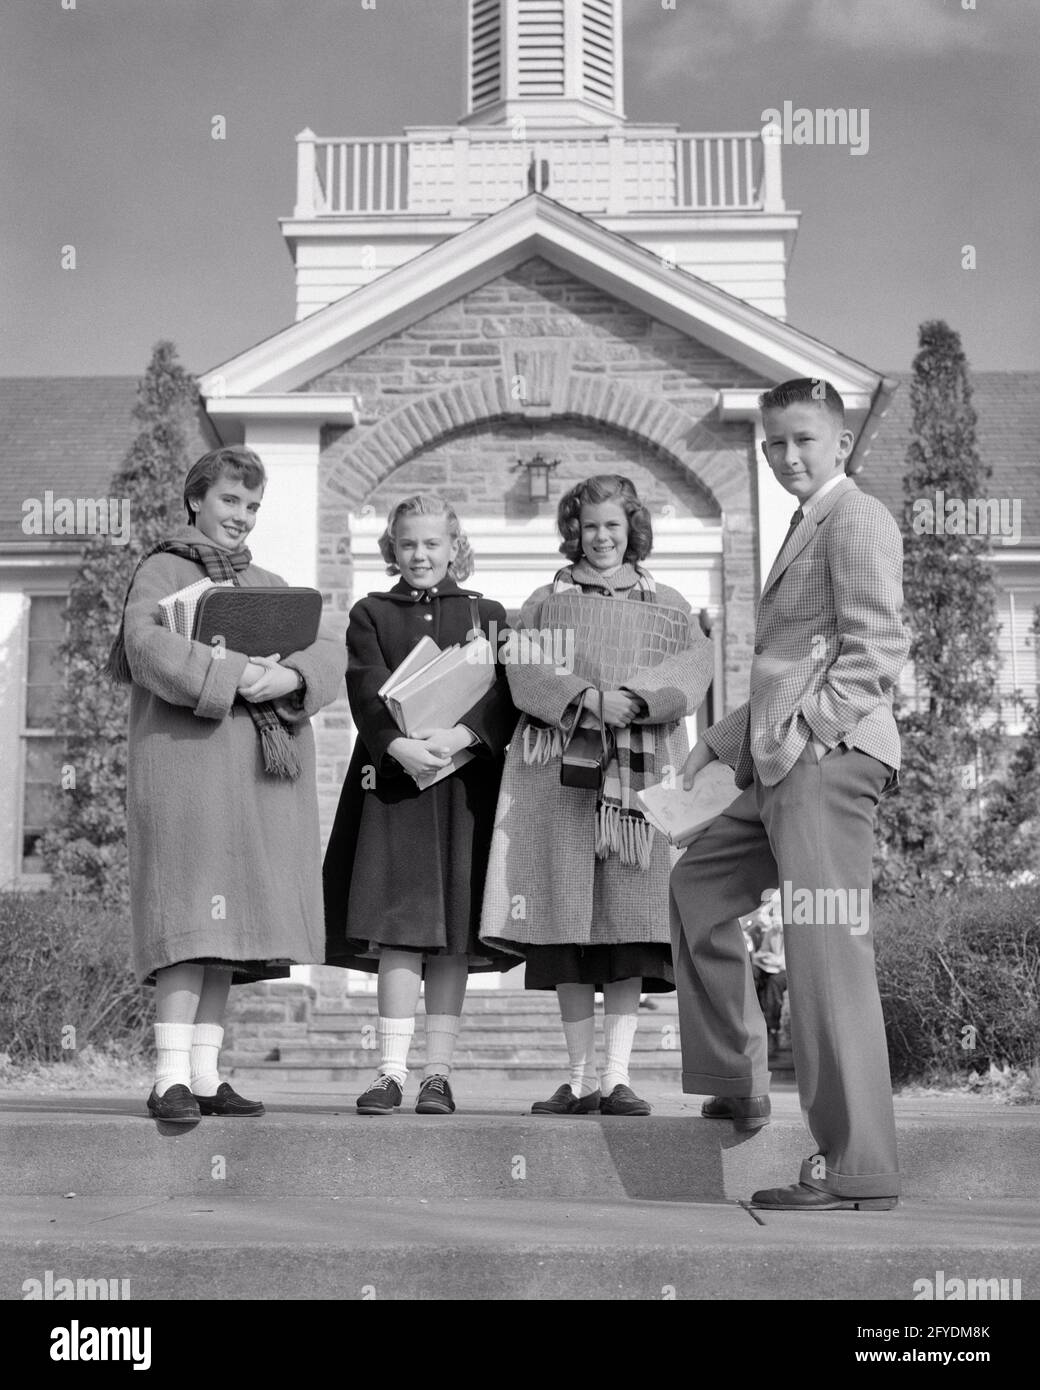 1950s 4 TEENAGERS STANDING IN FRONT OF SCHOOL BUILDING WEARING COATS CARRYING BOOKS 3 GIRLS AND 1 BOY ALL LOOKING AT CAMERA - s9726 HAR001 HARS COMMUNITY SUBURBAN OLD TIME BUSY NOSTALGIA OLD FASHION 1 JUVENILE STYLE TEAMWORK PLEASED JOY LIFESTYLE CELEBRATION FEMALES COATS COPY SPACE FRIENDSHIP FULL-LENGTH PERSONS MALES TEENAGE GIRL TEENAGE BOY CONFIDENCE B&W EYE CONTACT SCHOOLS SUIT AND TIE HAPPINESS CHEERFUL AND KNOWLEDGE PRIDE OPPORTUNITY HIGH SCHOOL SMILES HIGH SCHOOLS CONNECTION JOYFUL STYLISH TEENAGED JUNIOR COOPERATION GROWTH JUVENILES TOGETHERNESS BLACK AND WHITE CAUCASIAN ETHNICITY Stock Photo